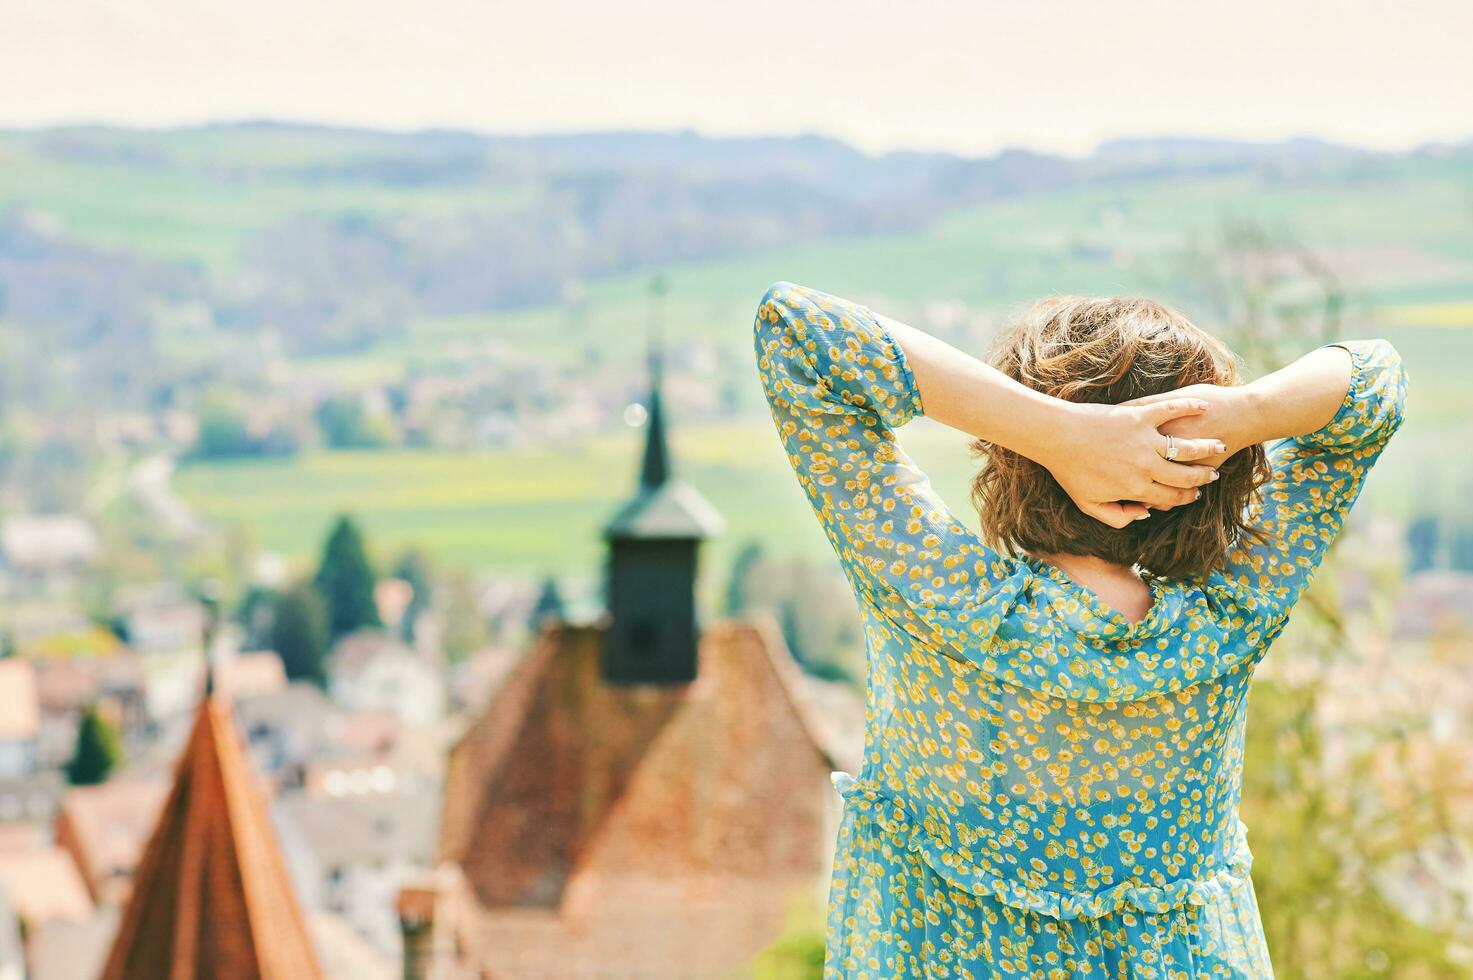 Outdoor portrait of happy young woman travel in Europe, visiting old castle, image take in Switzerland, back view photo